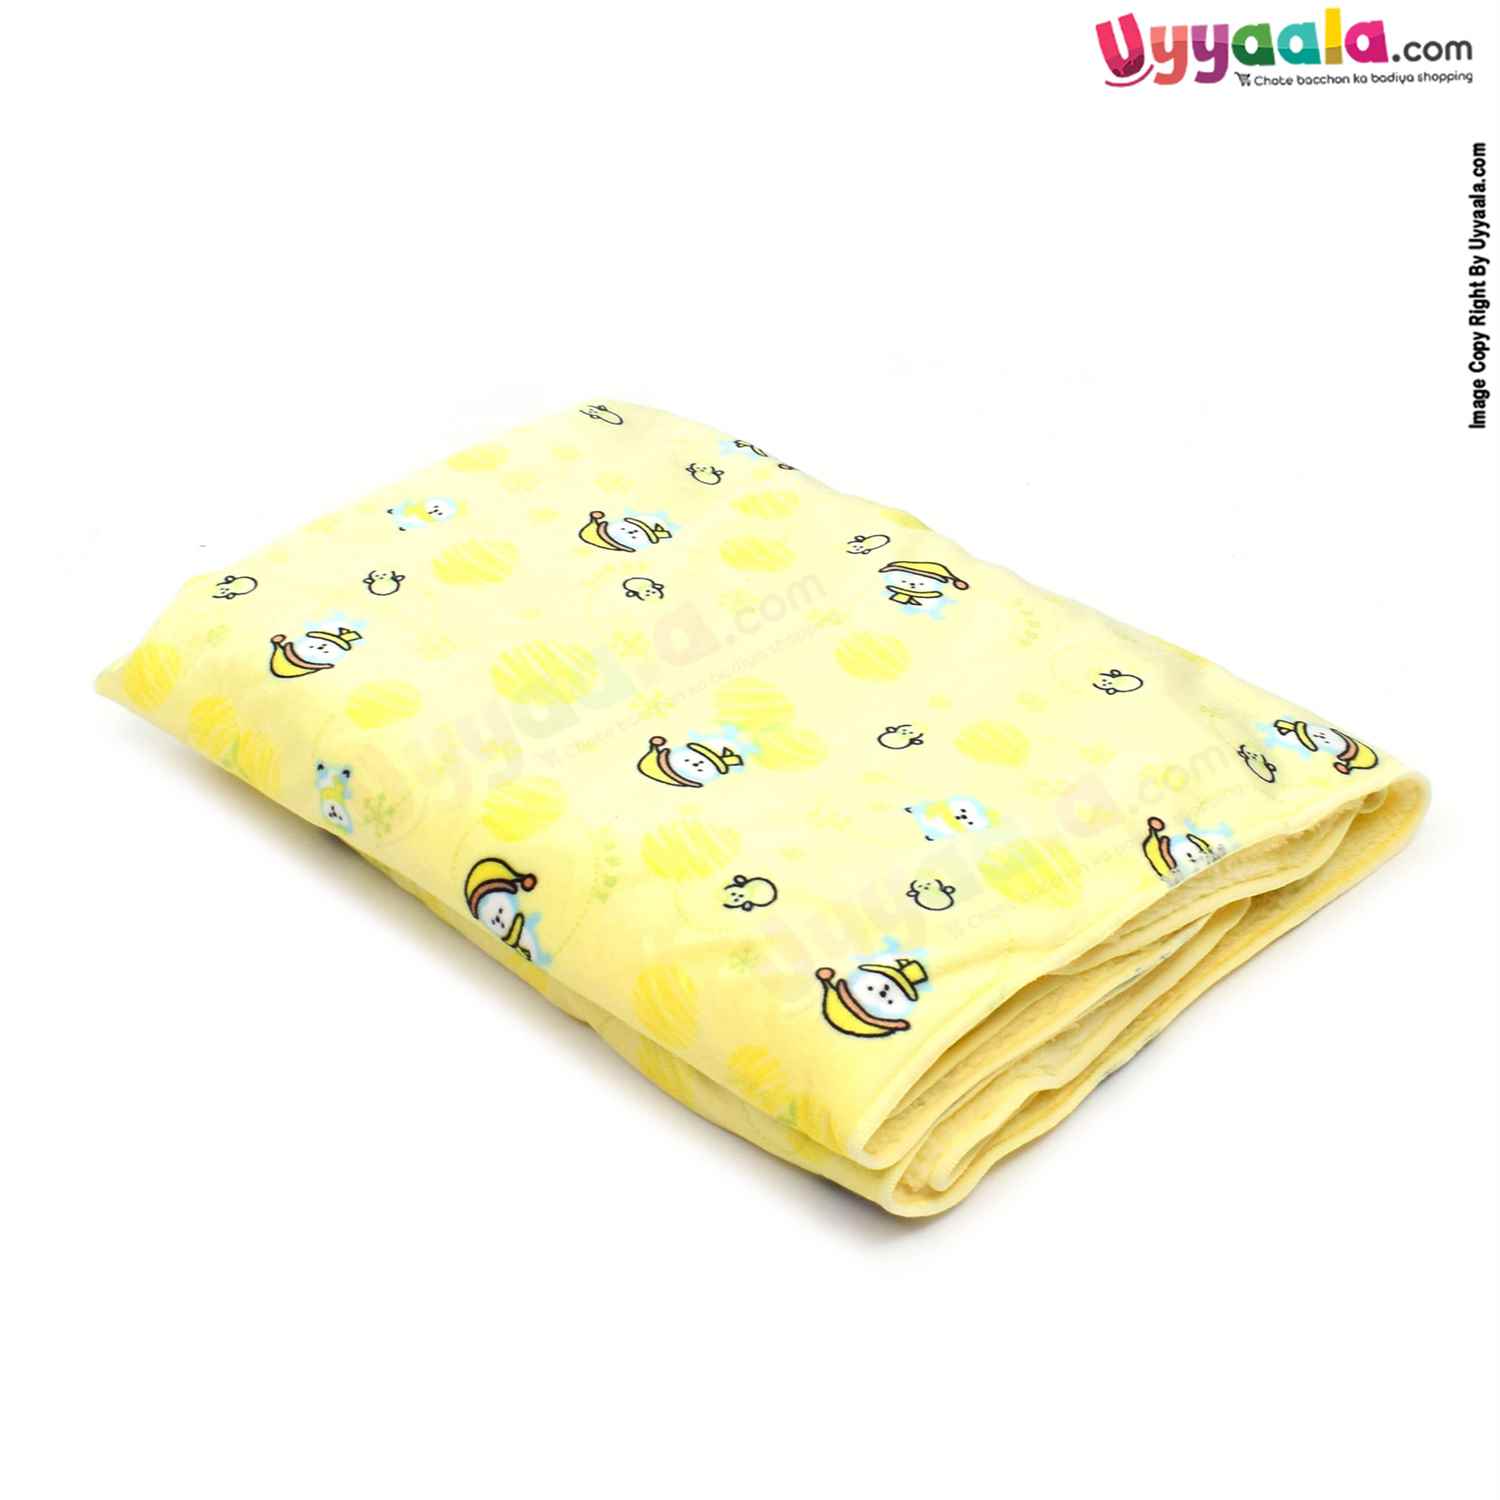 Super Soft Double Layered Blanket One Side Fur & Other Side Velvet, with Snow Man Print 0-24m Age, Size (101*73Cm)-Yellow